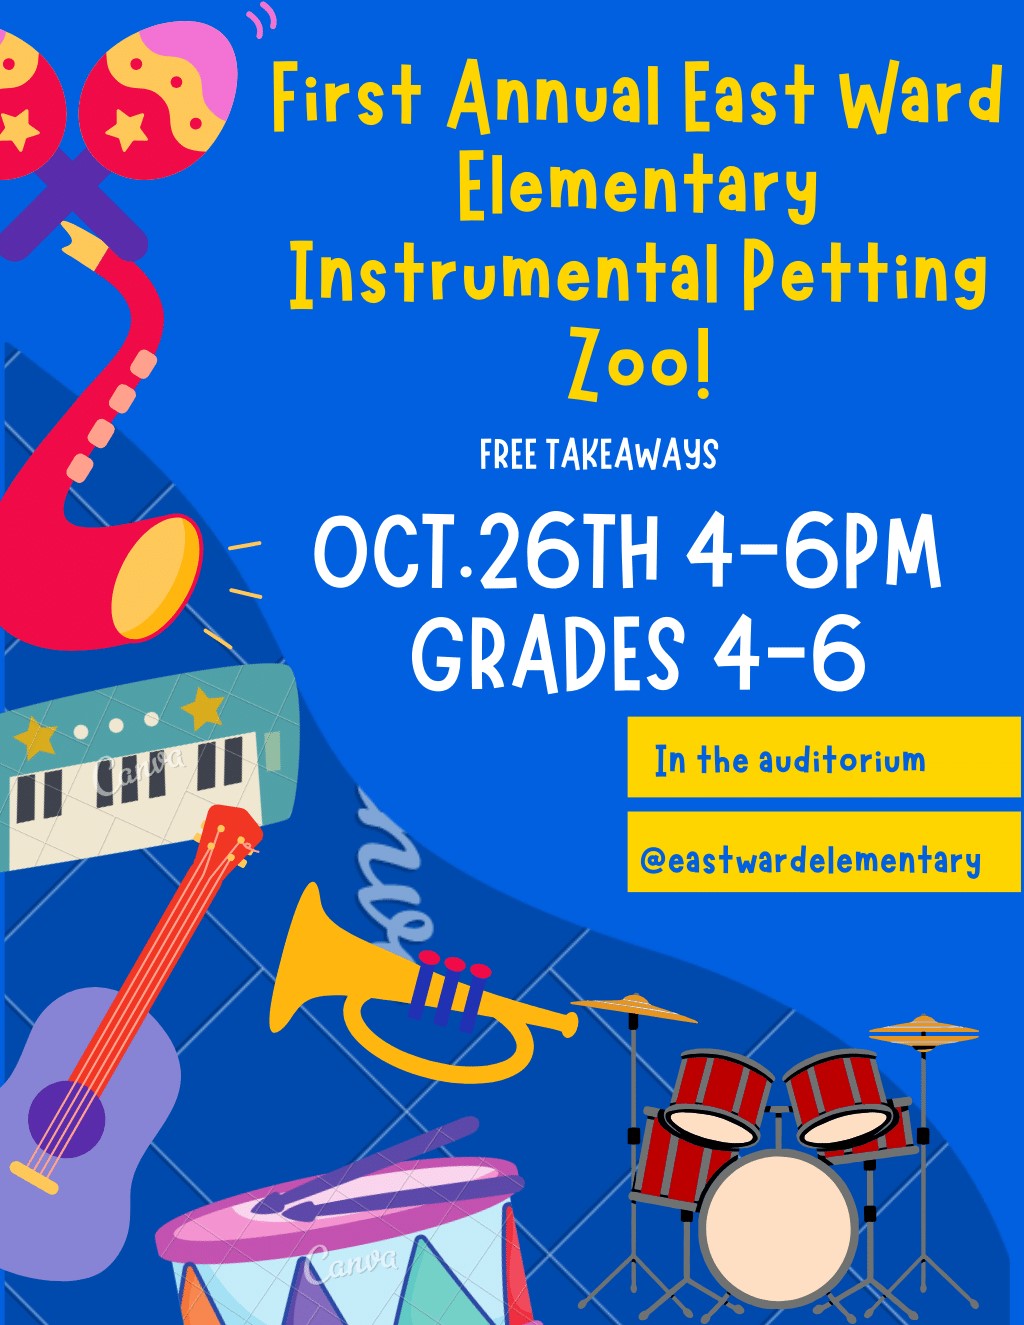 East Ward Elementary Instrument Petting Zoo. October 26th. 4-6 PM